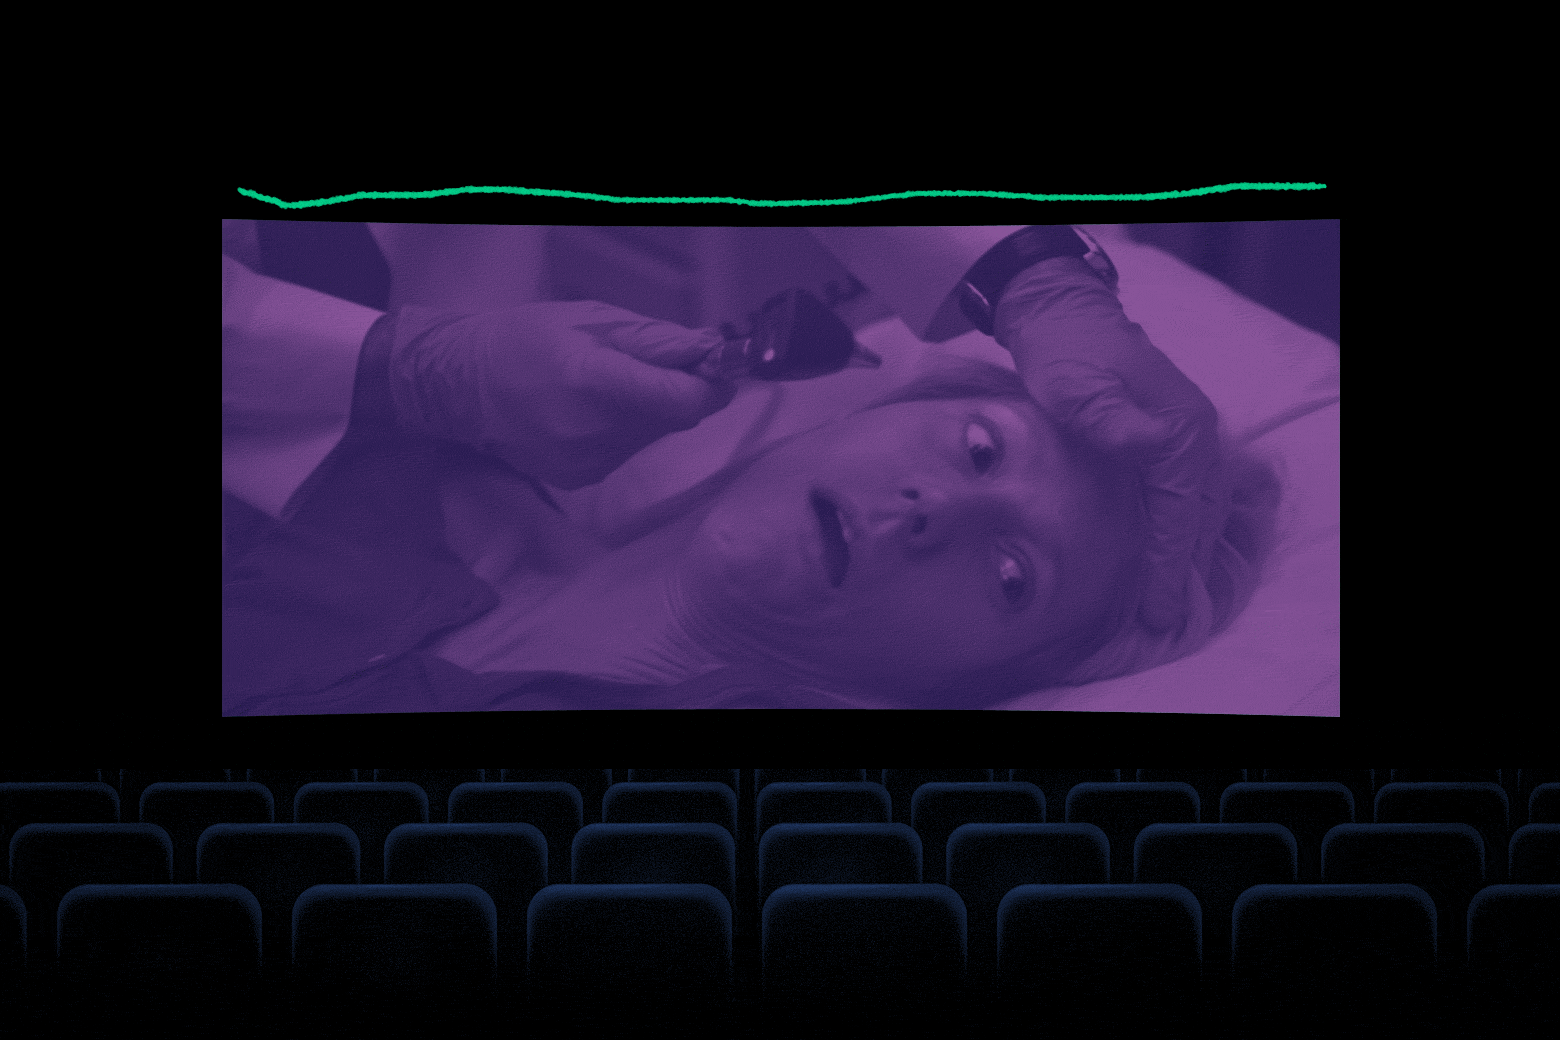 An empty movie theater's screen shows Gwyneth Paltrow on a bed with a doctor checking her head.